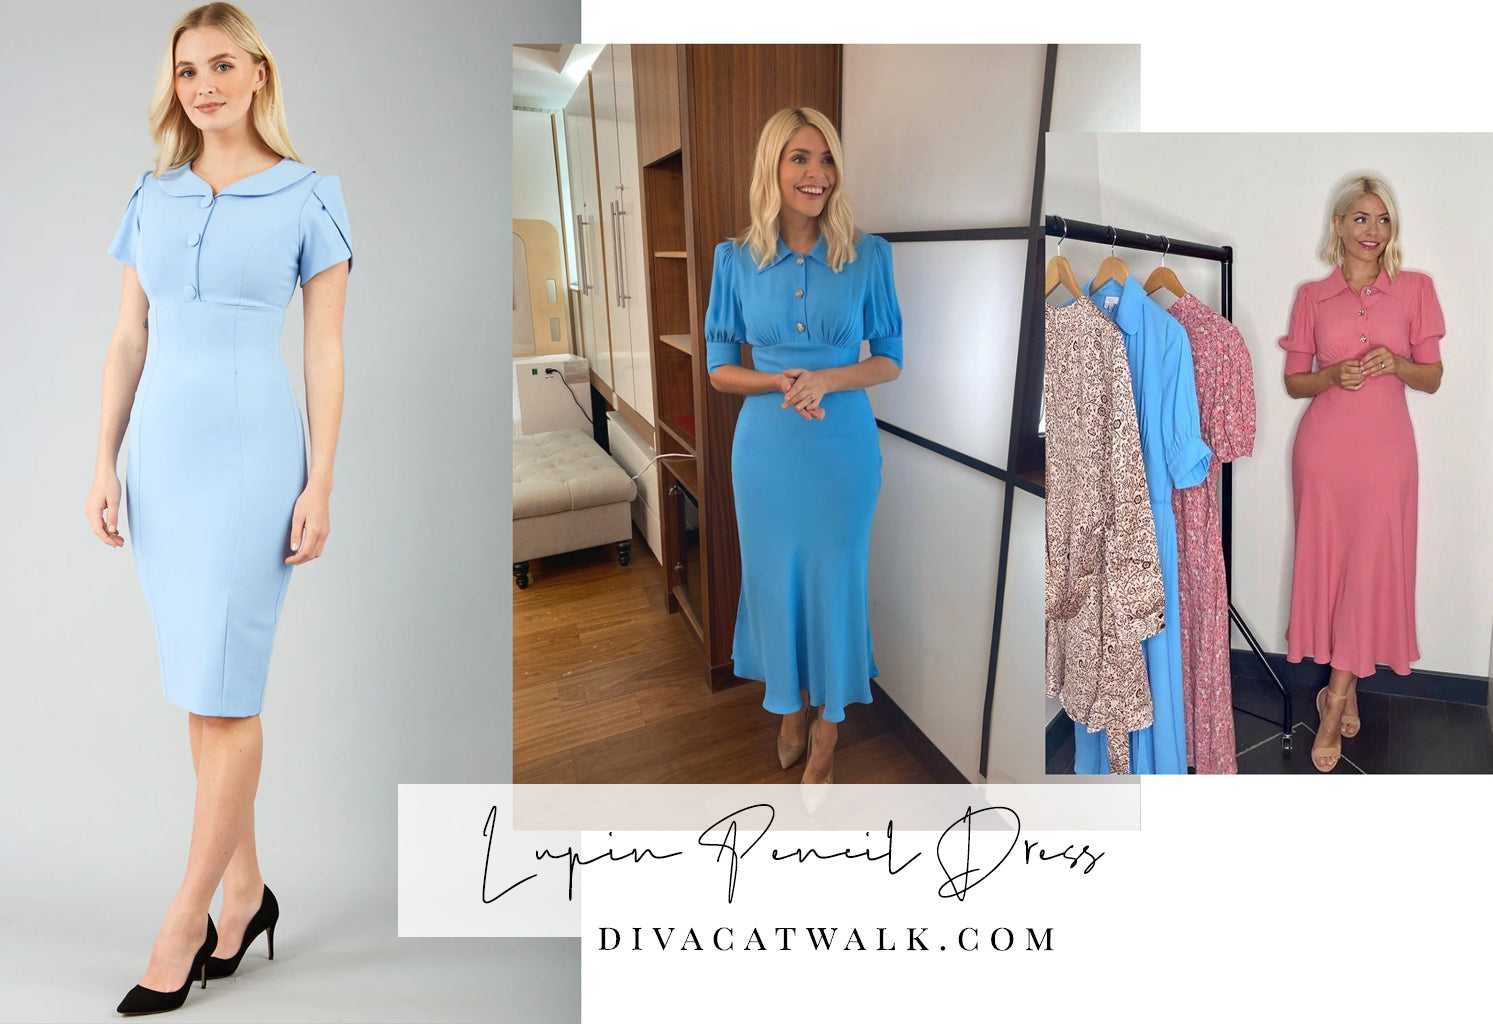  holly willoughby pictured in an blue dress, with an attached image of a similar dress available, called Lupin, from Diva Catwalk.